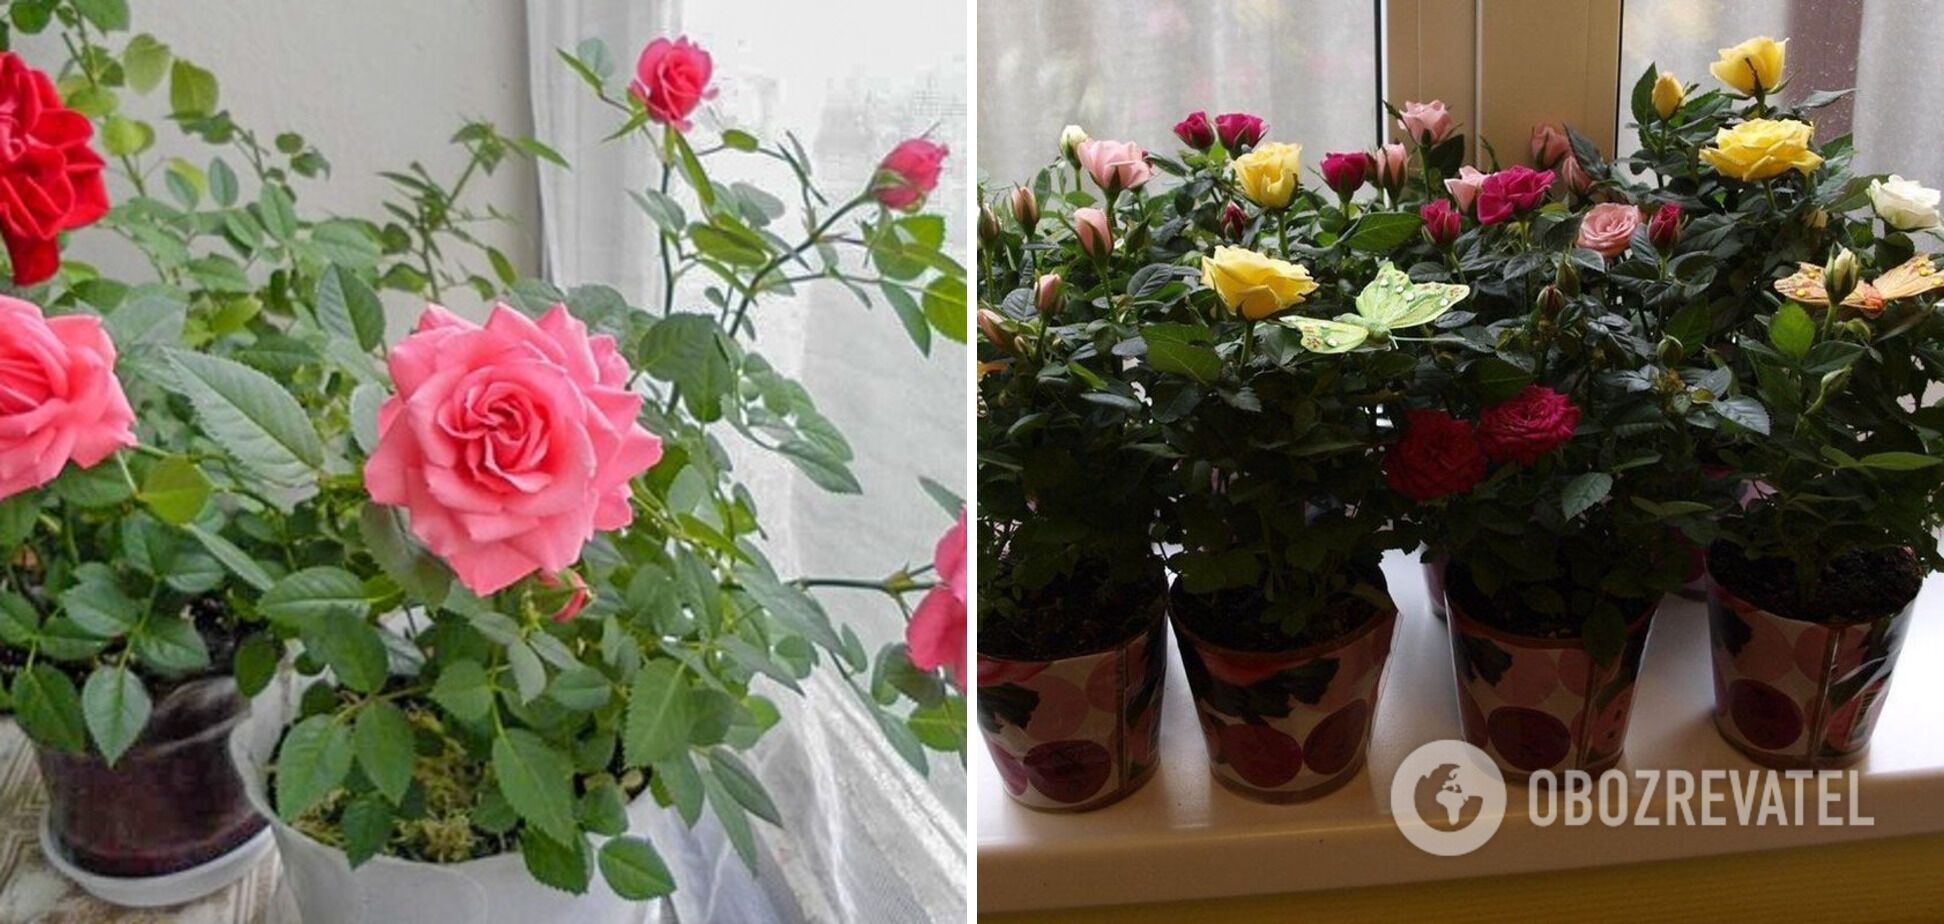 Palm and rose bring loneliness: what indoor flowers should not be put in the bedroom